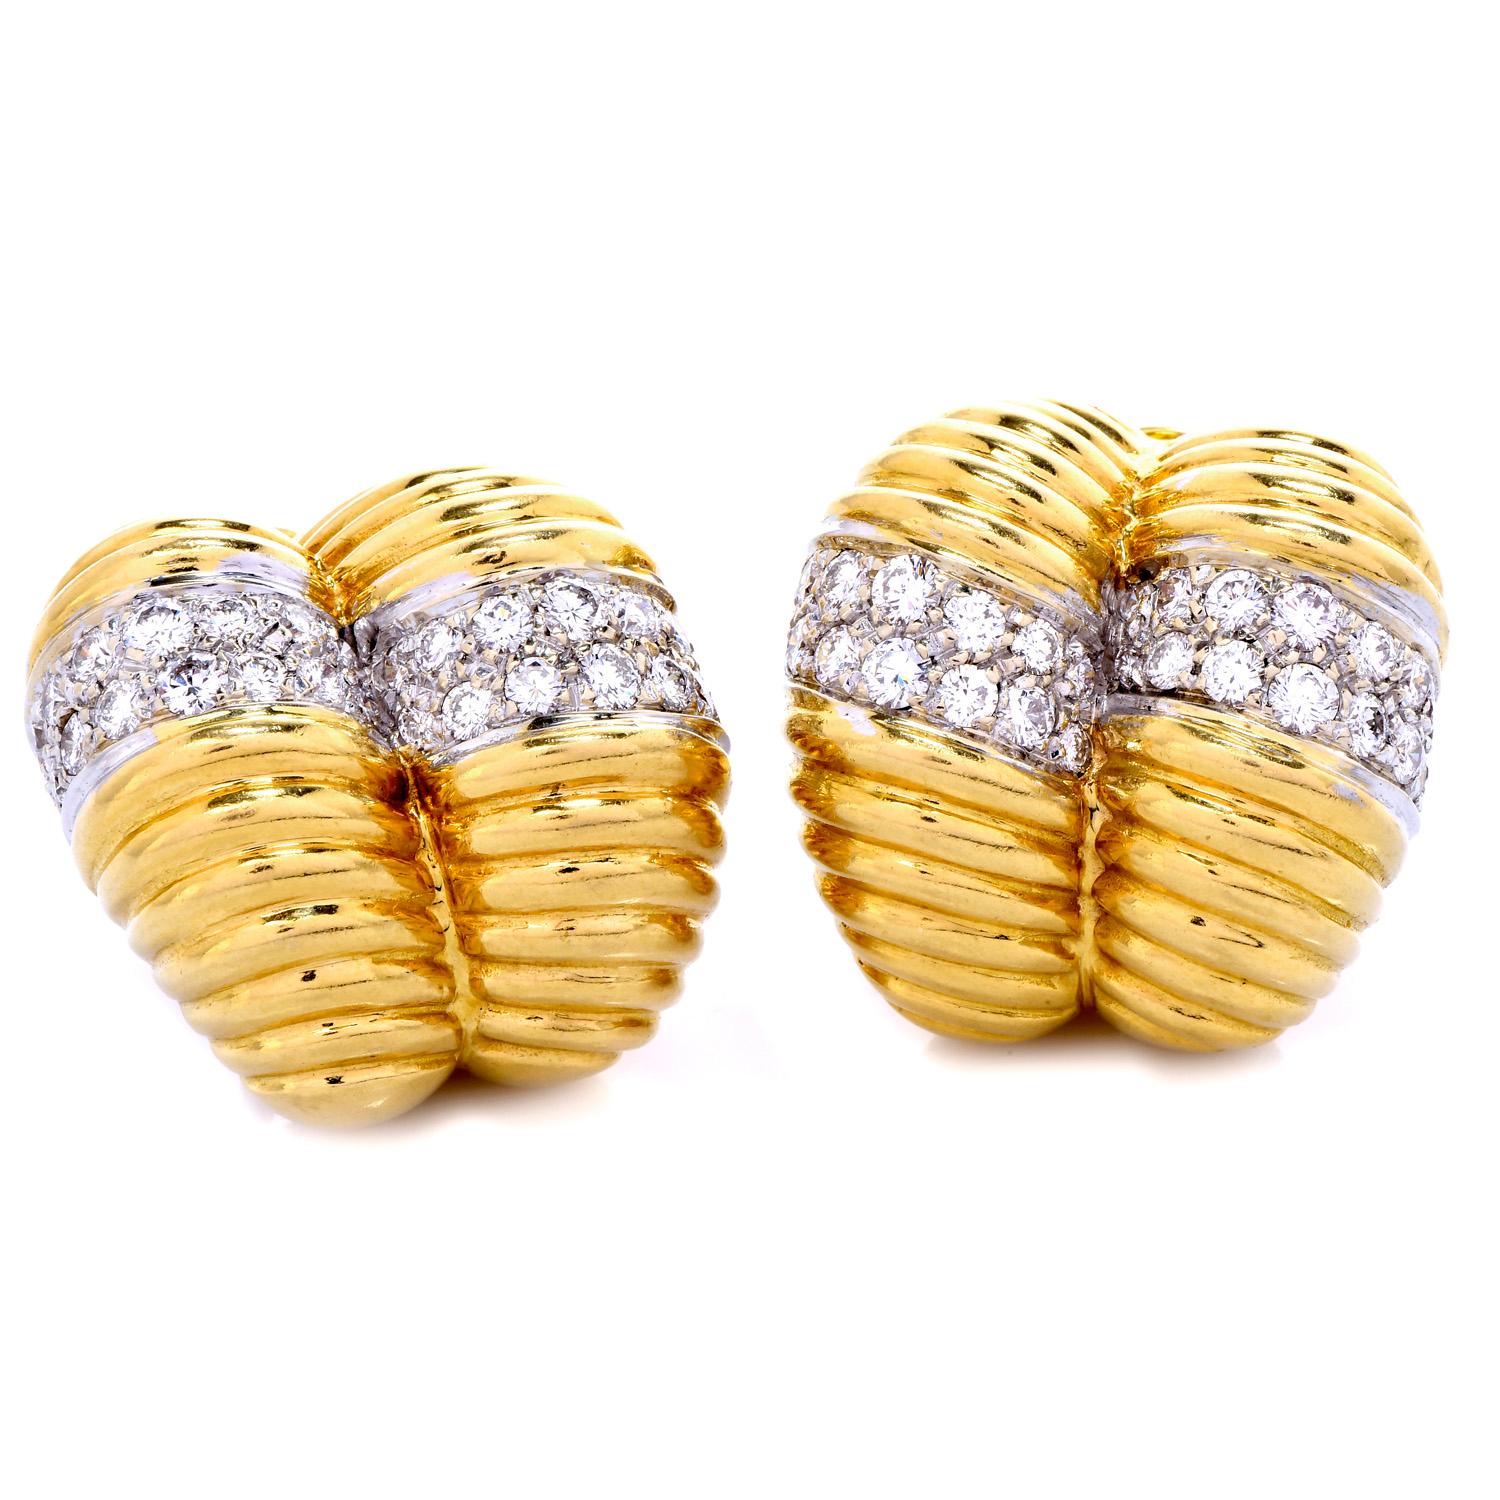 Huge your ears with these vintage 1970's  High-Quality Link double shrimp Hoop Earring for any occasion!

Crafted in Solid 18K Yellow Gold, With a Pave set Link Design of 56 Round Cut Diamonds with a total carat weight of 2.75carats, G-H  Color, VS